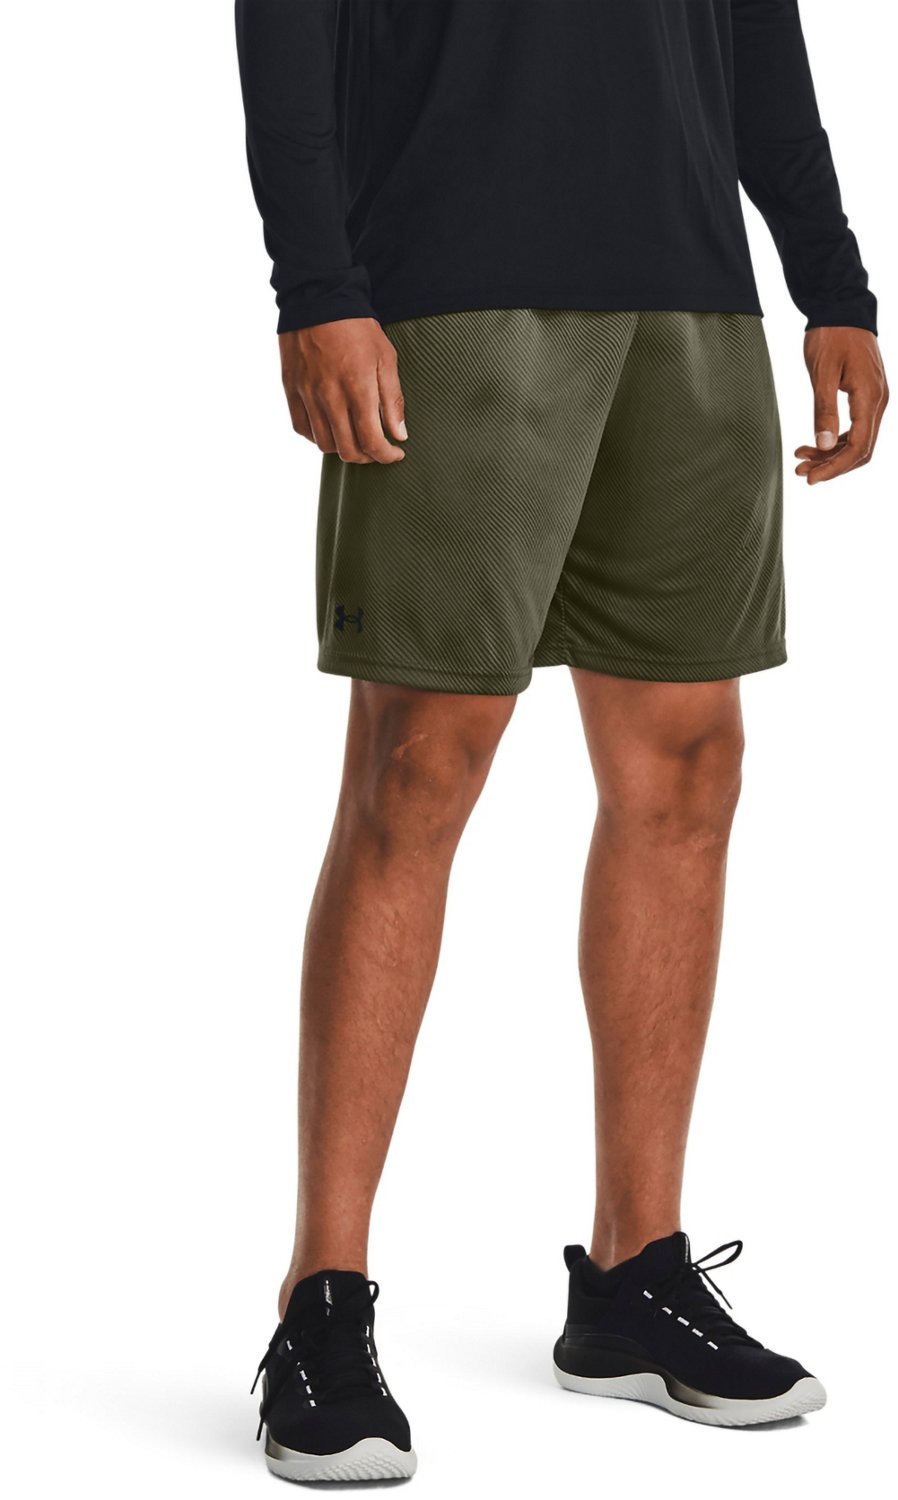 Under Armour Mens Tech Printed Shorts 10 in